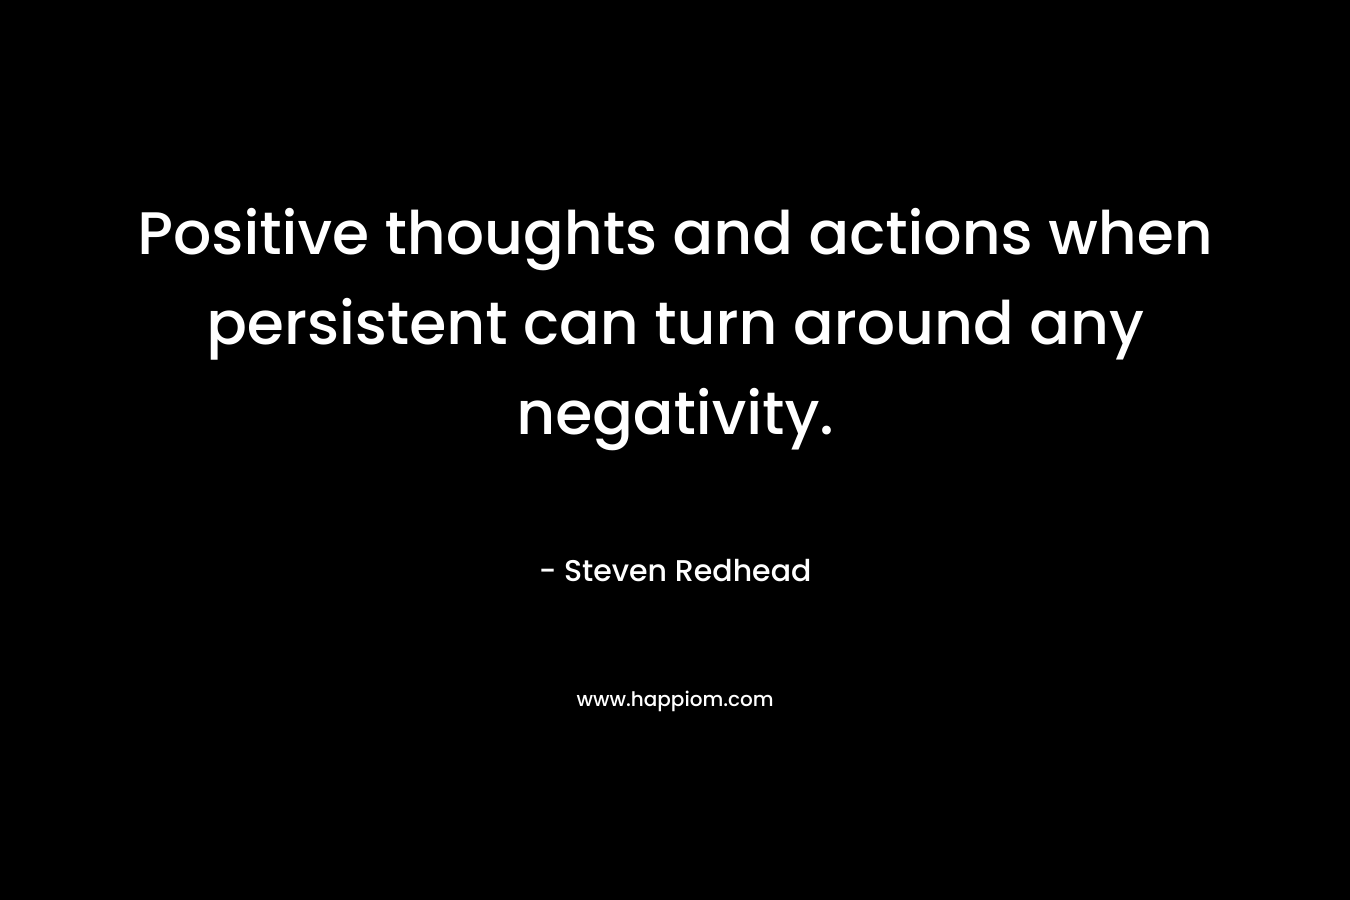 Positive thoughts and actions when persistent can turn around any negativity.